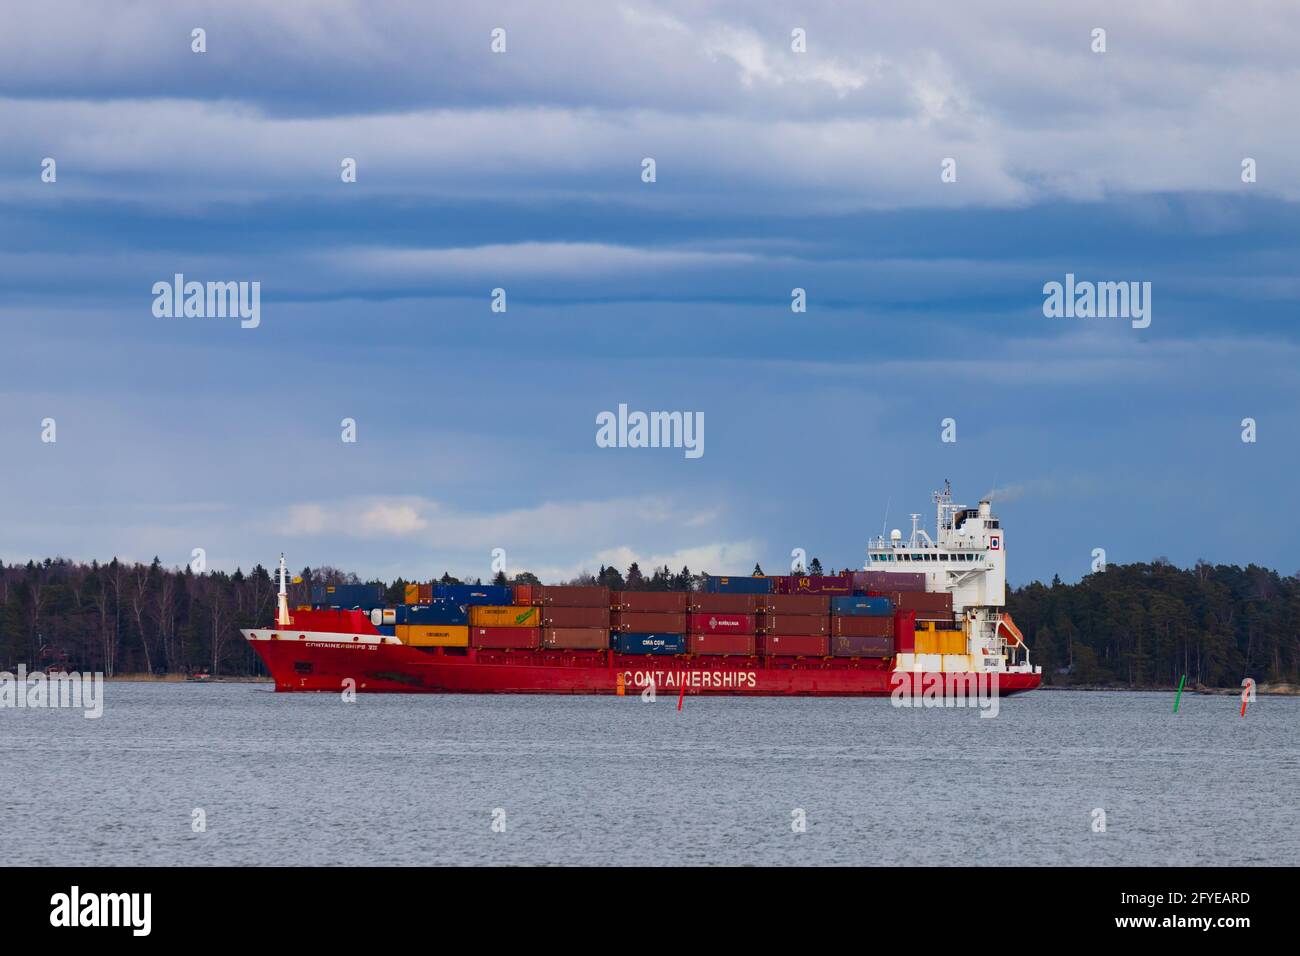 Cargo ship Containerships VII approaching Vuosaari Harbour on April 3, 2021. Operated by Containerships and sailing under Finnish flag. Stock Photo